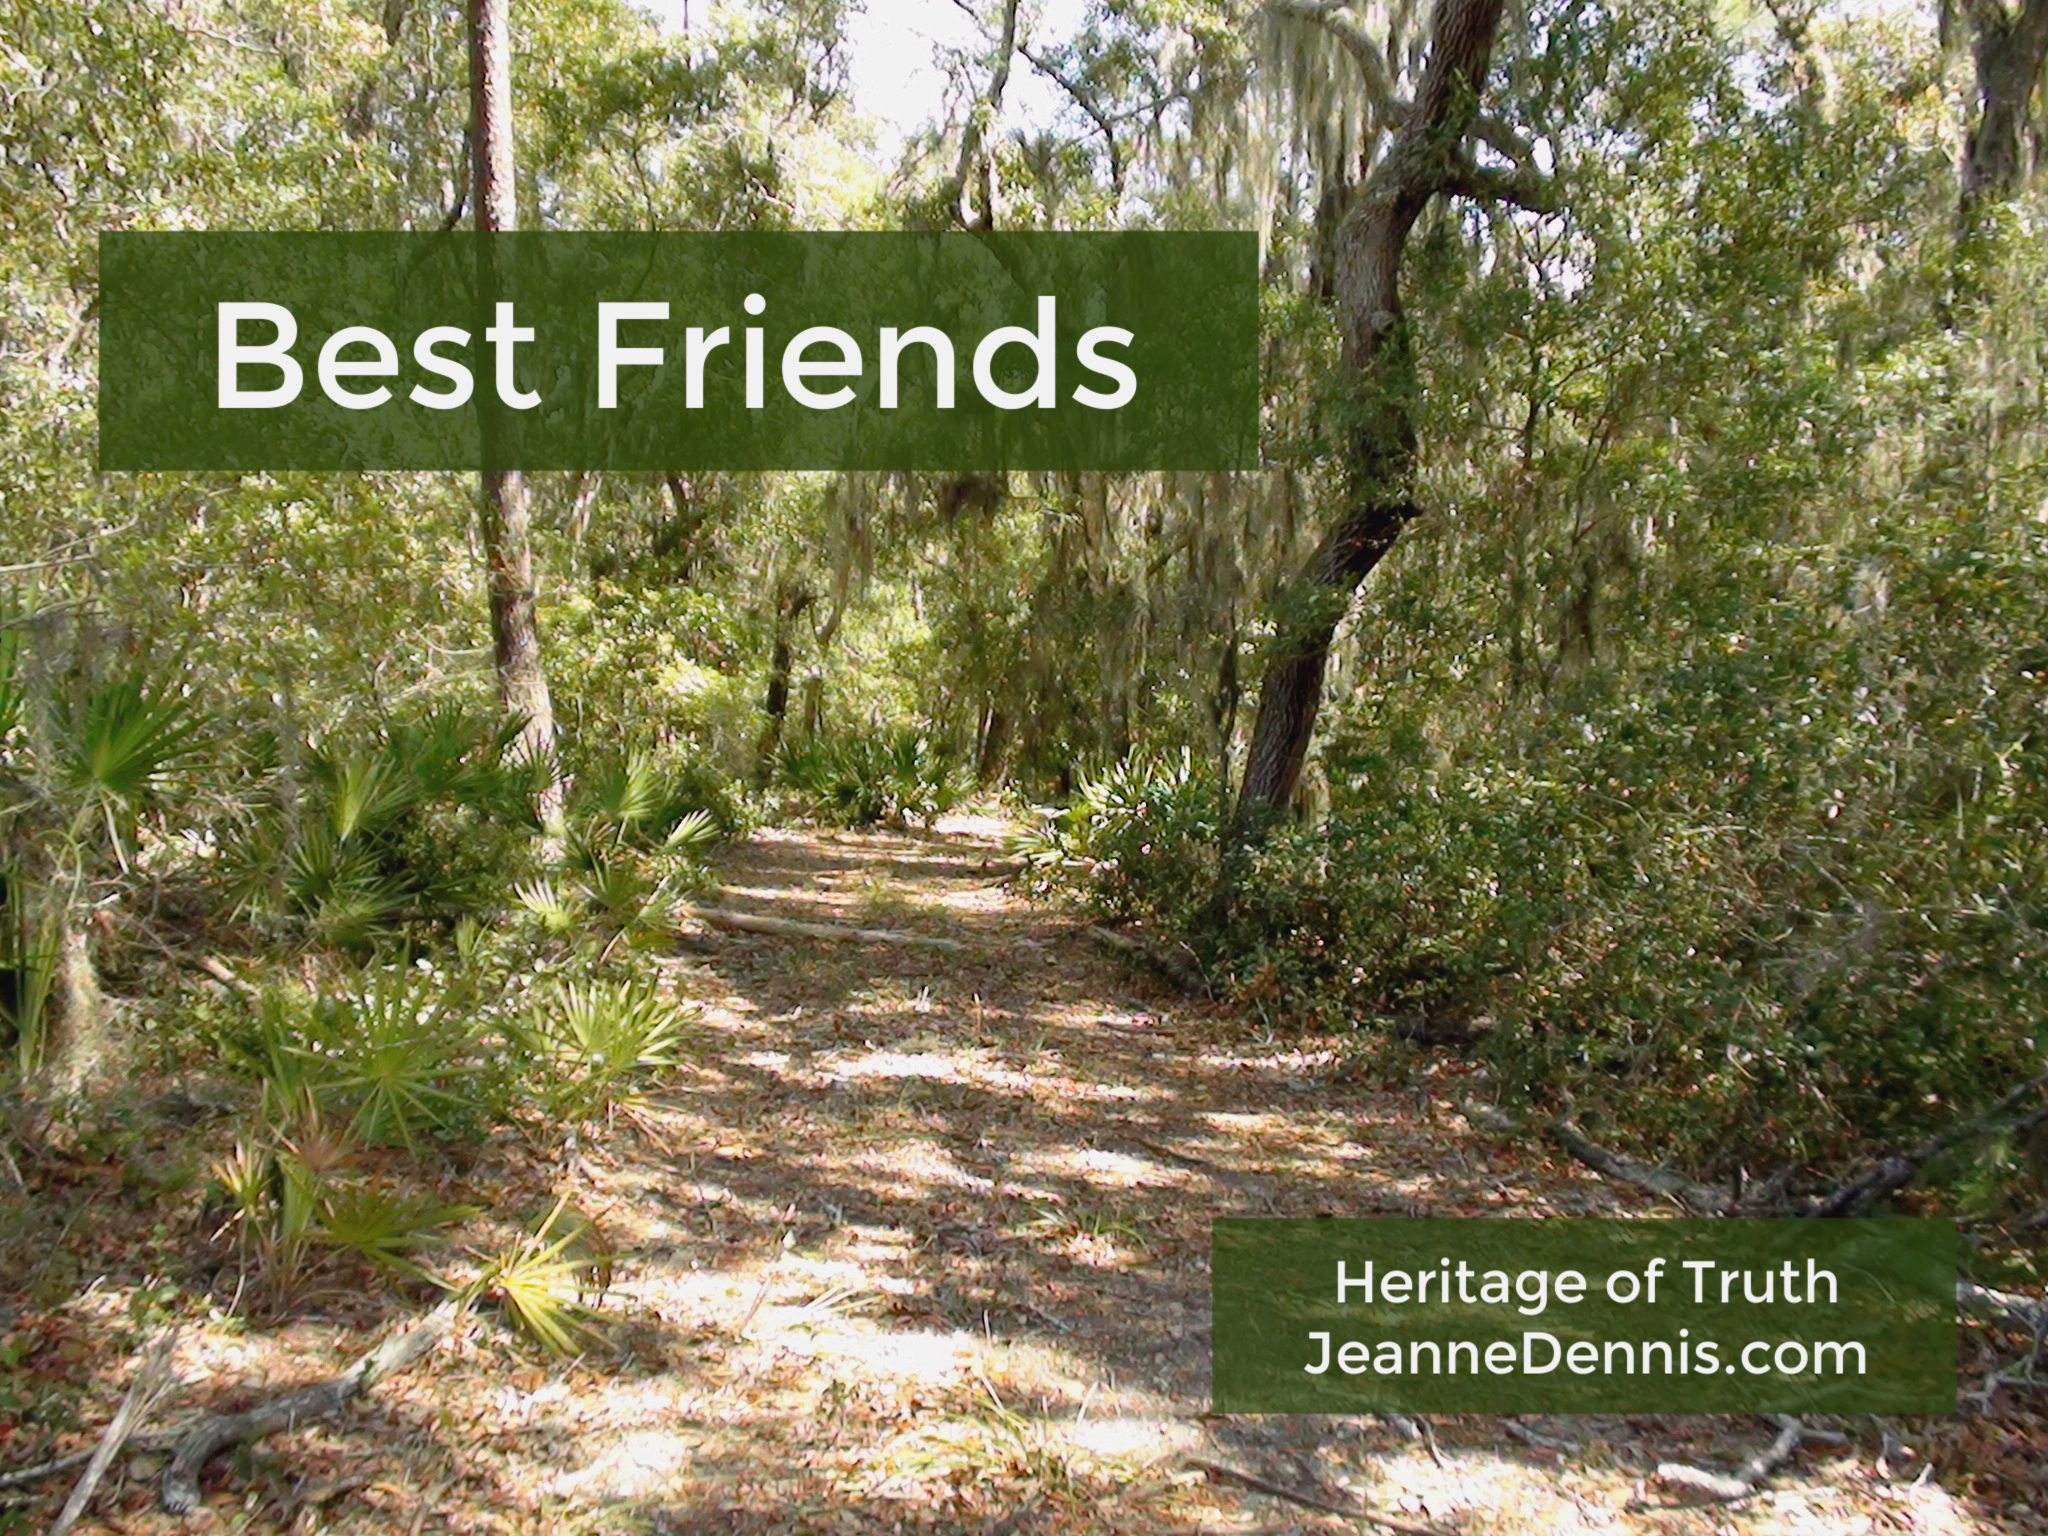 Best Friends, Heritage of Truth, JeanneDennis.com